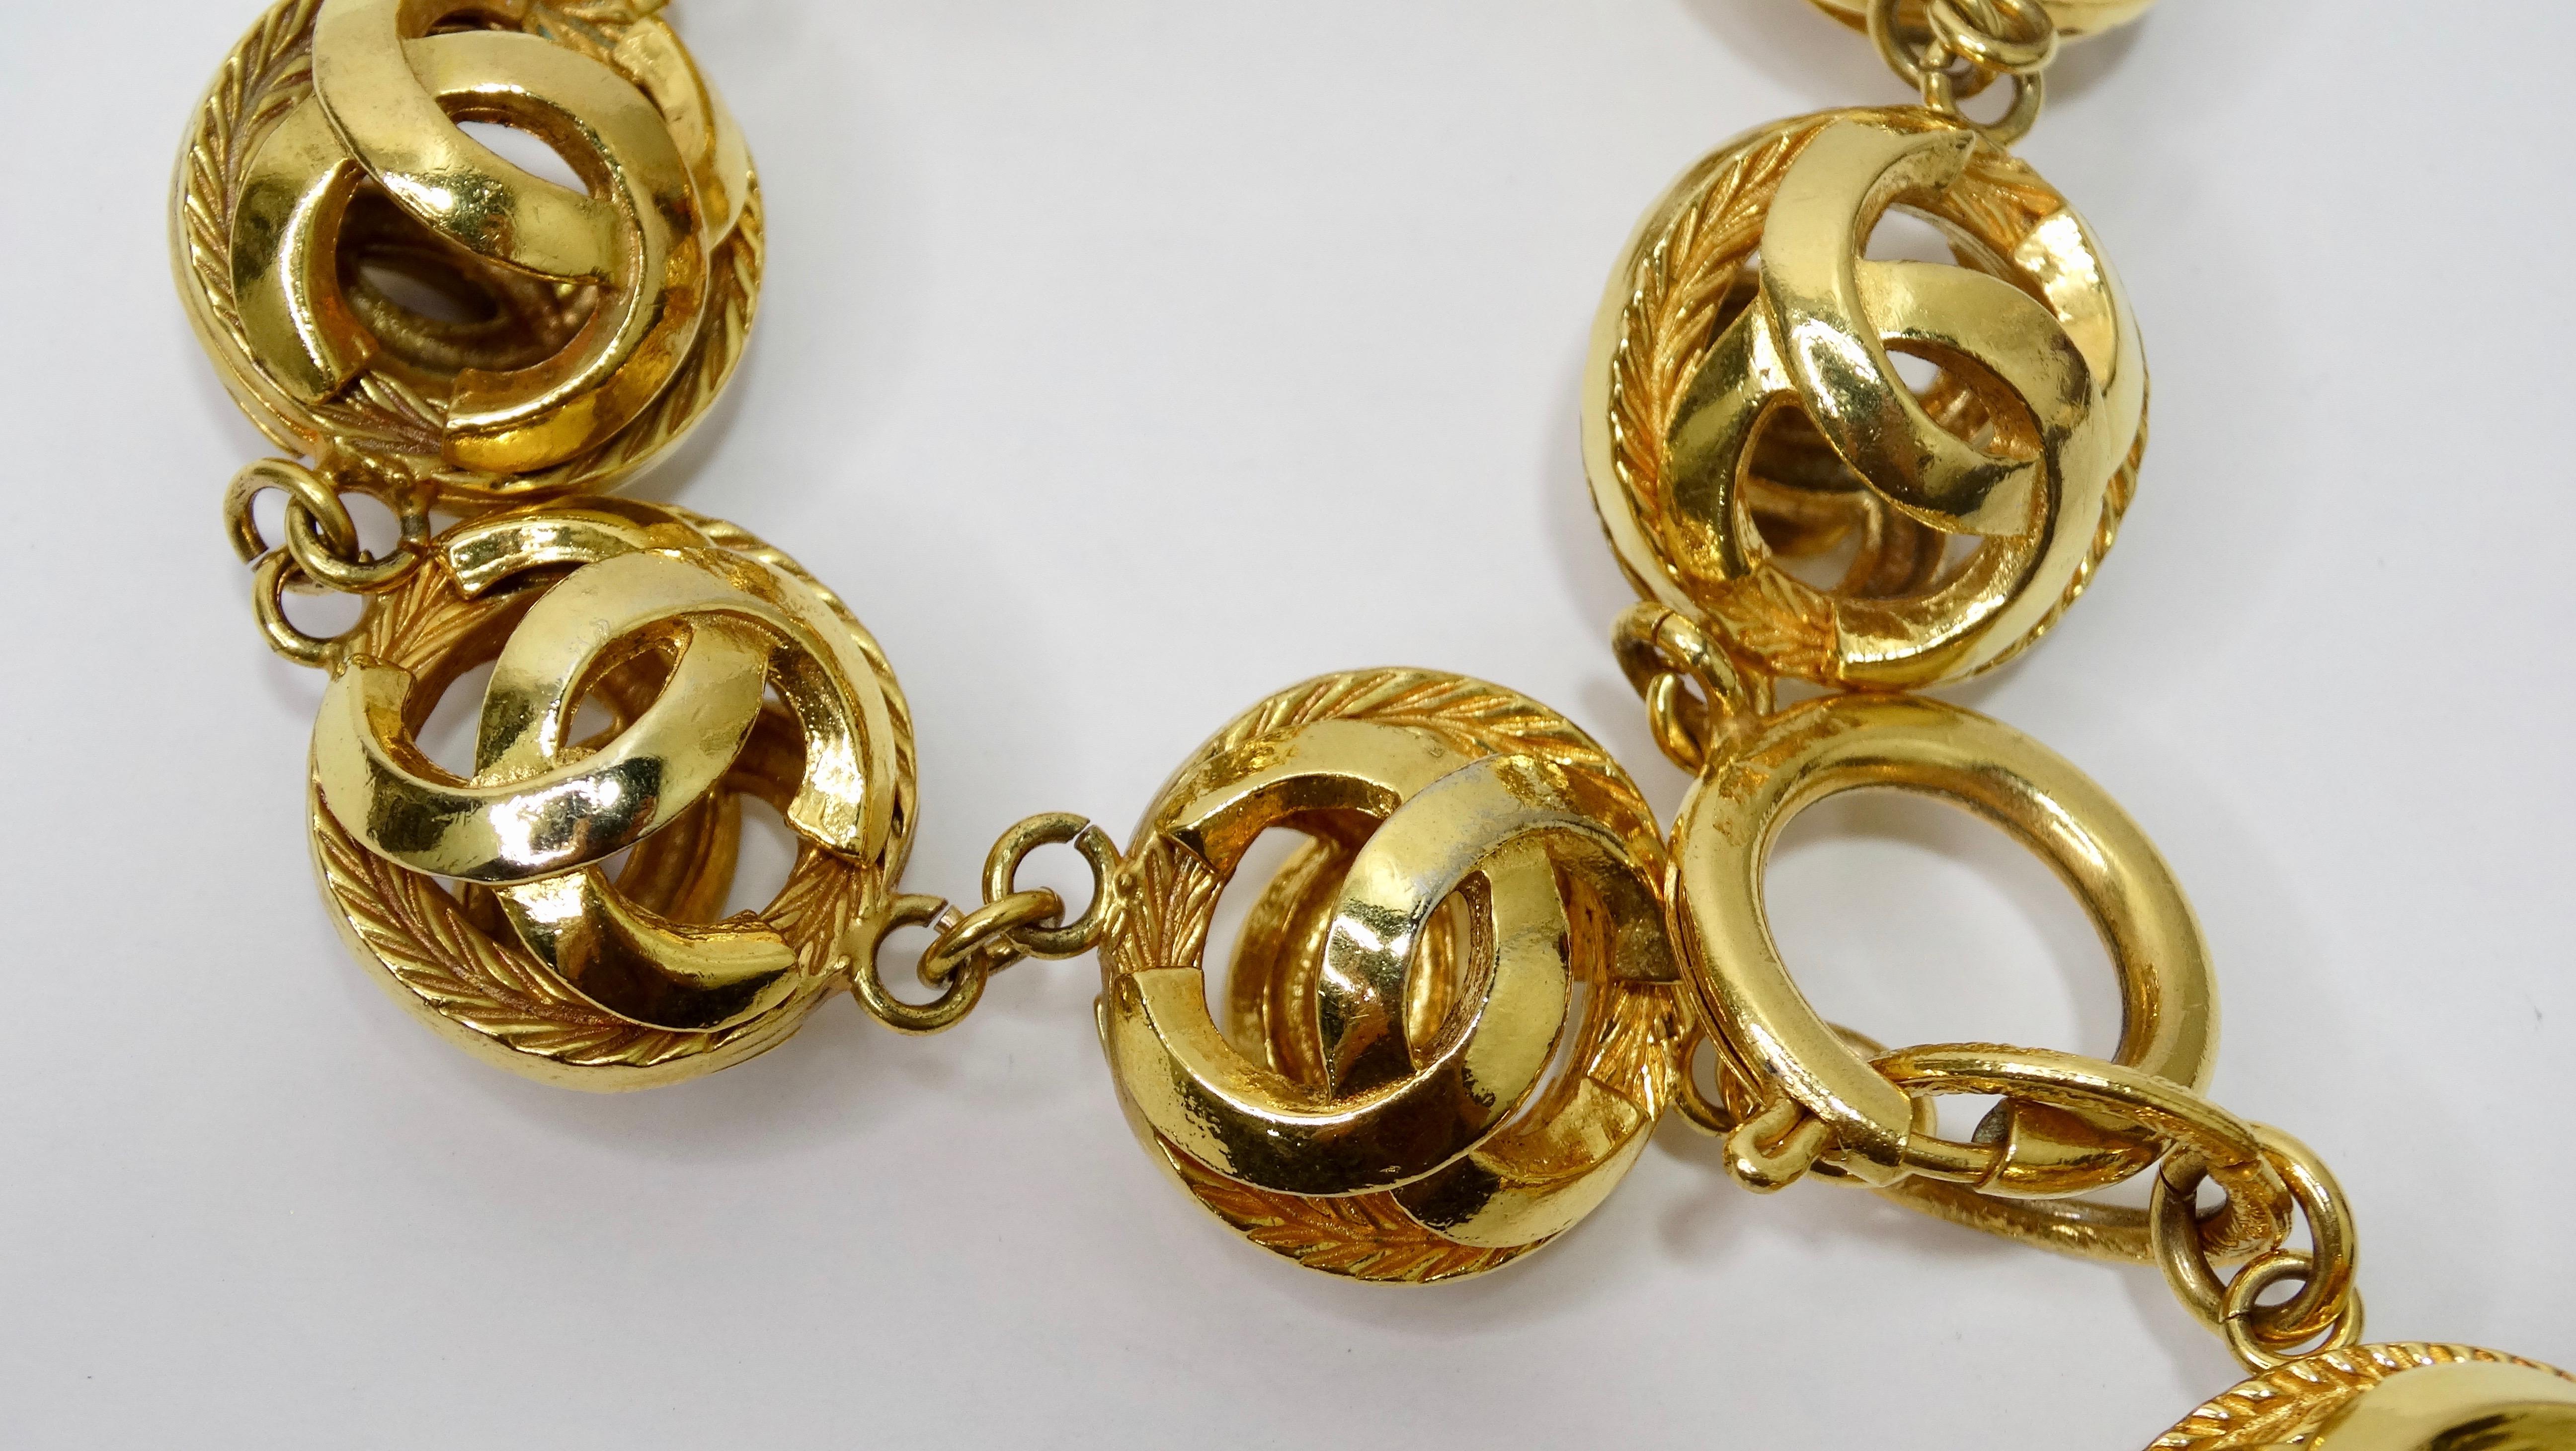 Everyone needs a great vintage Chanel piece! Circa early 1980s, this gold plated Chanel bracelet features linked spheres with the iconic CC logo on both sides. Includes a spring-ring closure and is stamped Chanel Made in France. The perfect